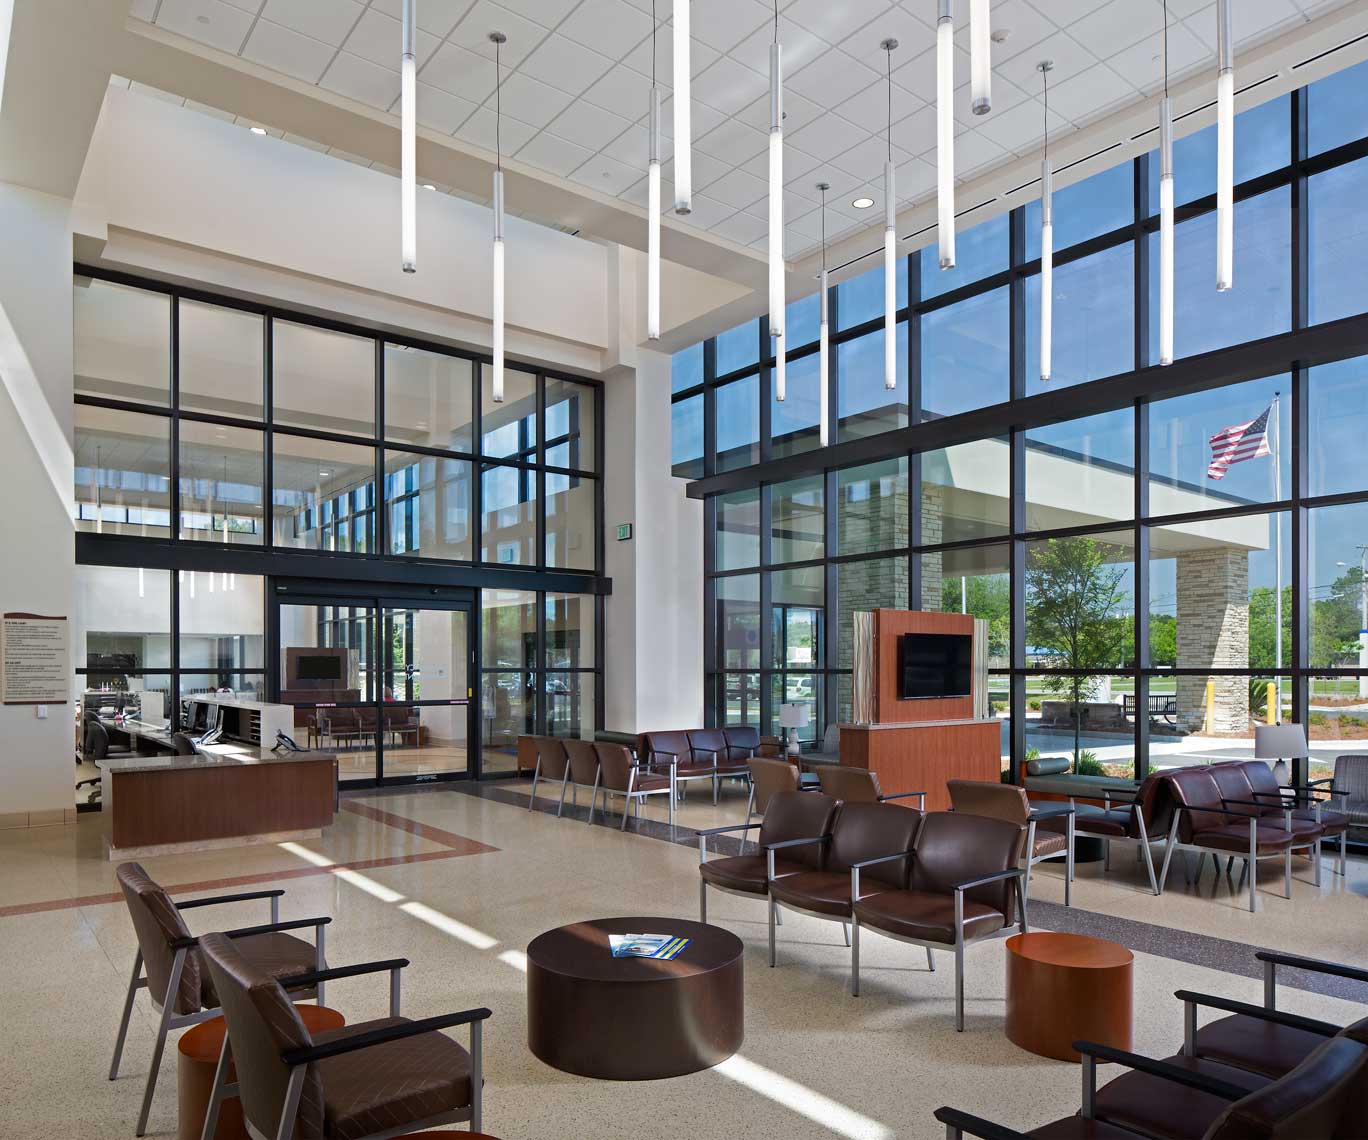 This view of the spacious lobby shows the interplay of interior and exterior at Colquitt Regional Medical Center